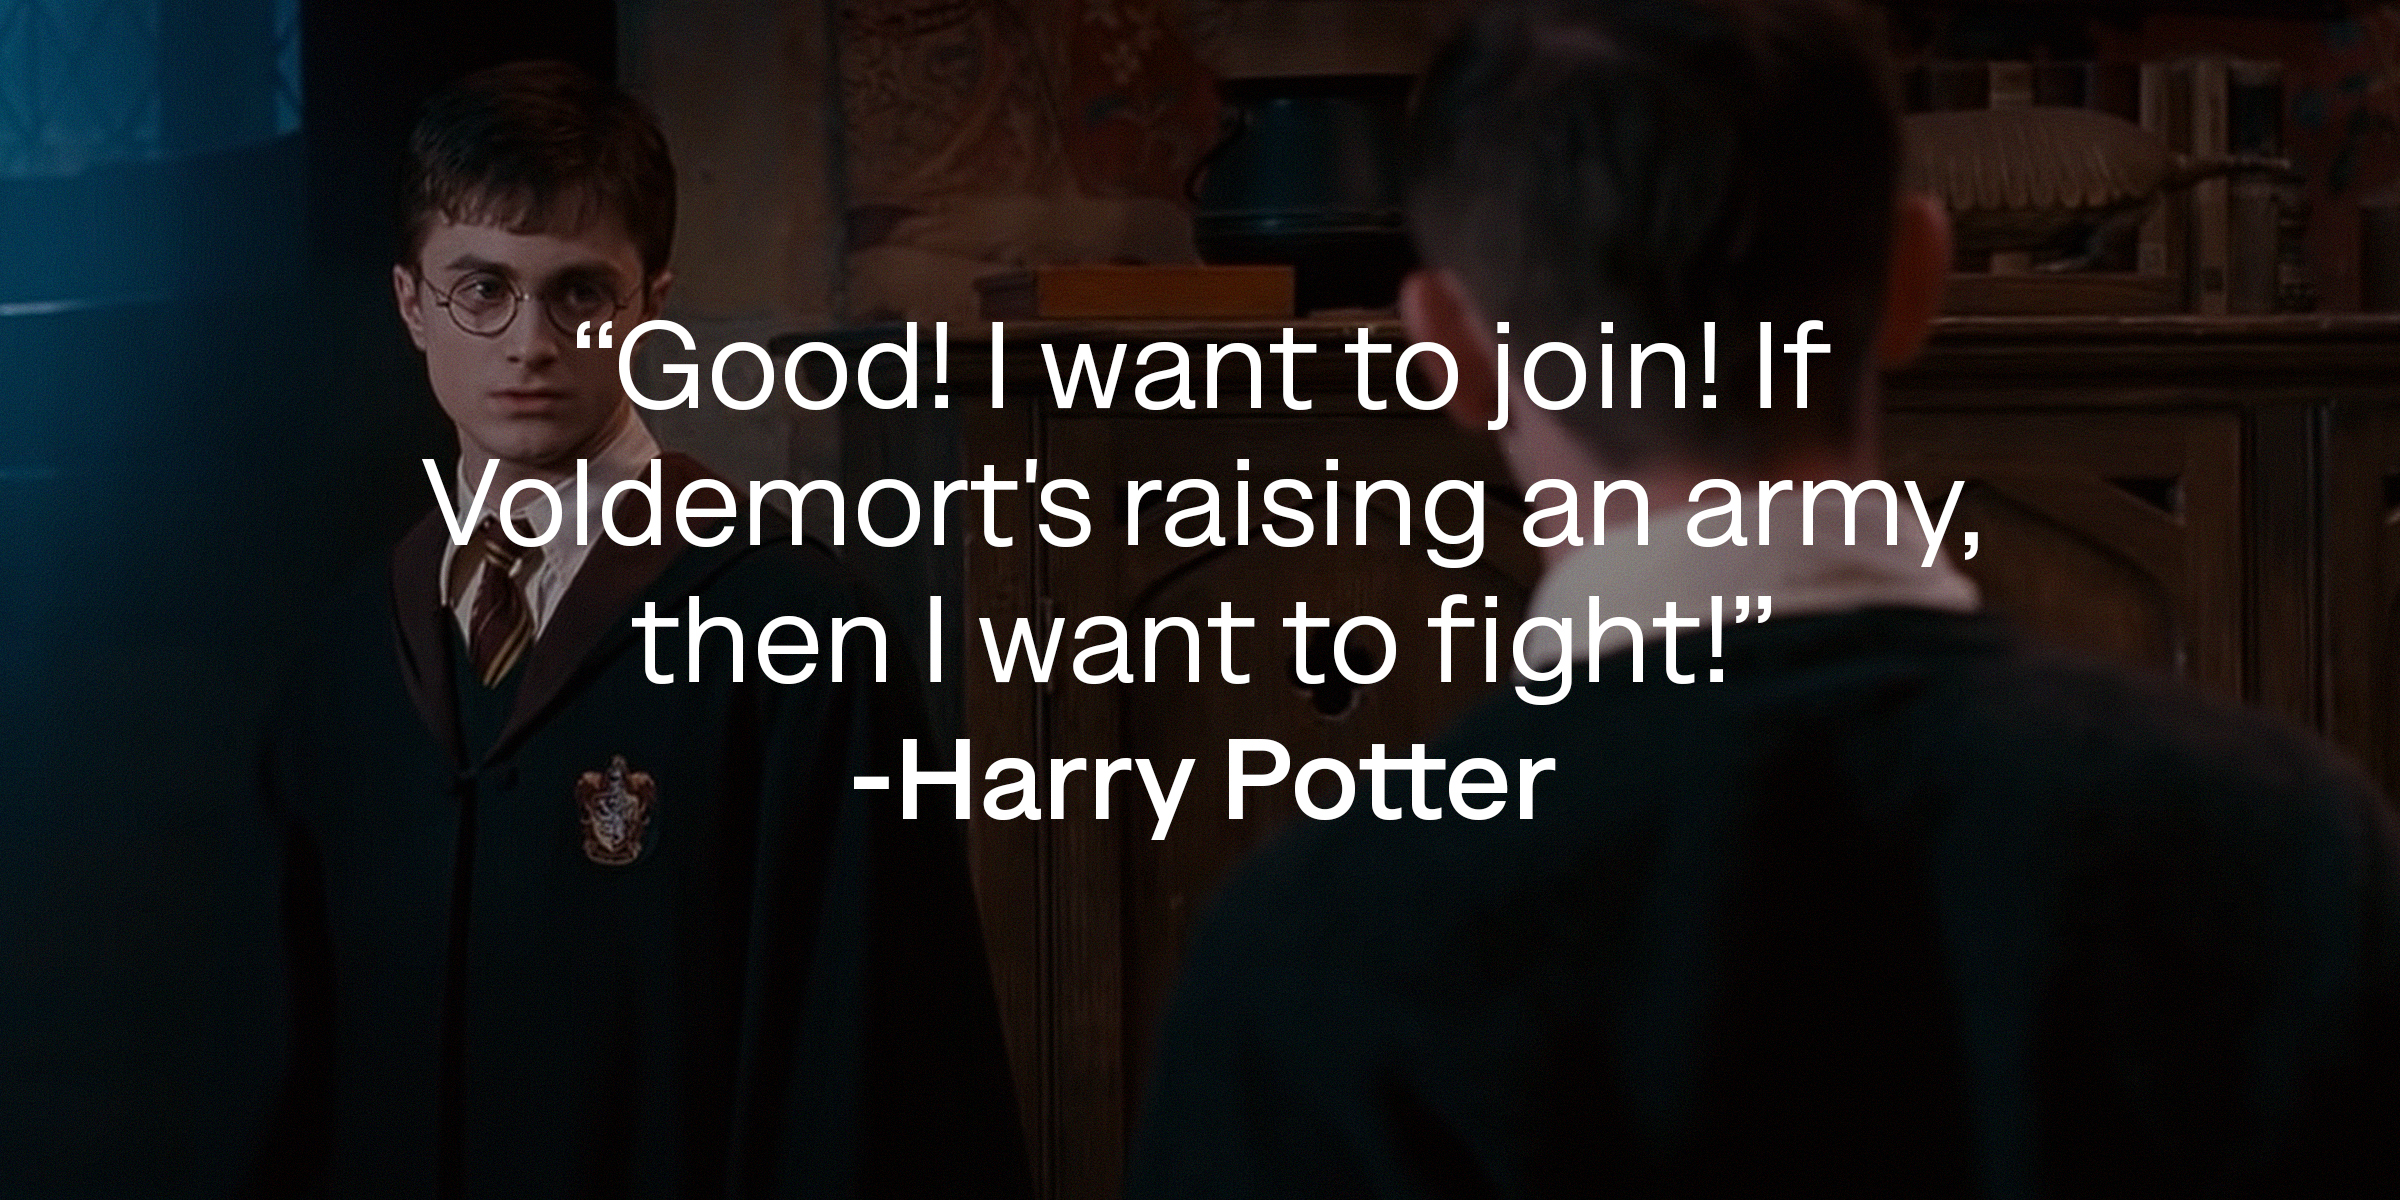 A photo of Harry Potter with Harry Potter's quote: “Good! I want to join! If Voldemort's raising an army, then I want to fight!” | Source: youtube.com/harrypotter